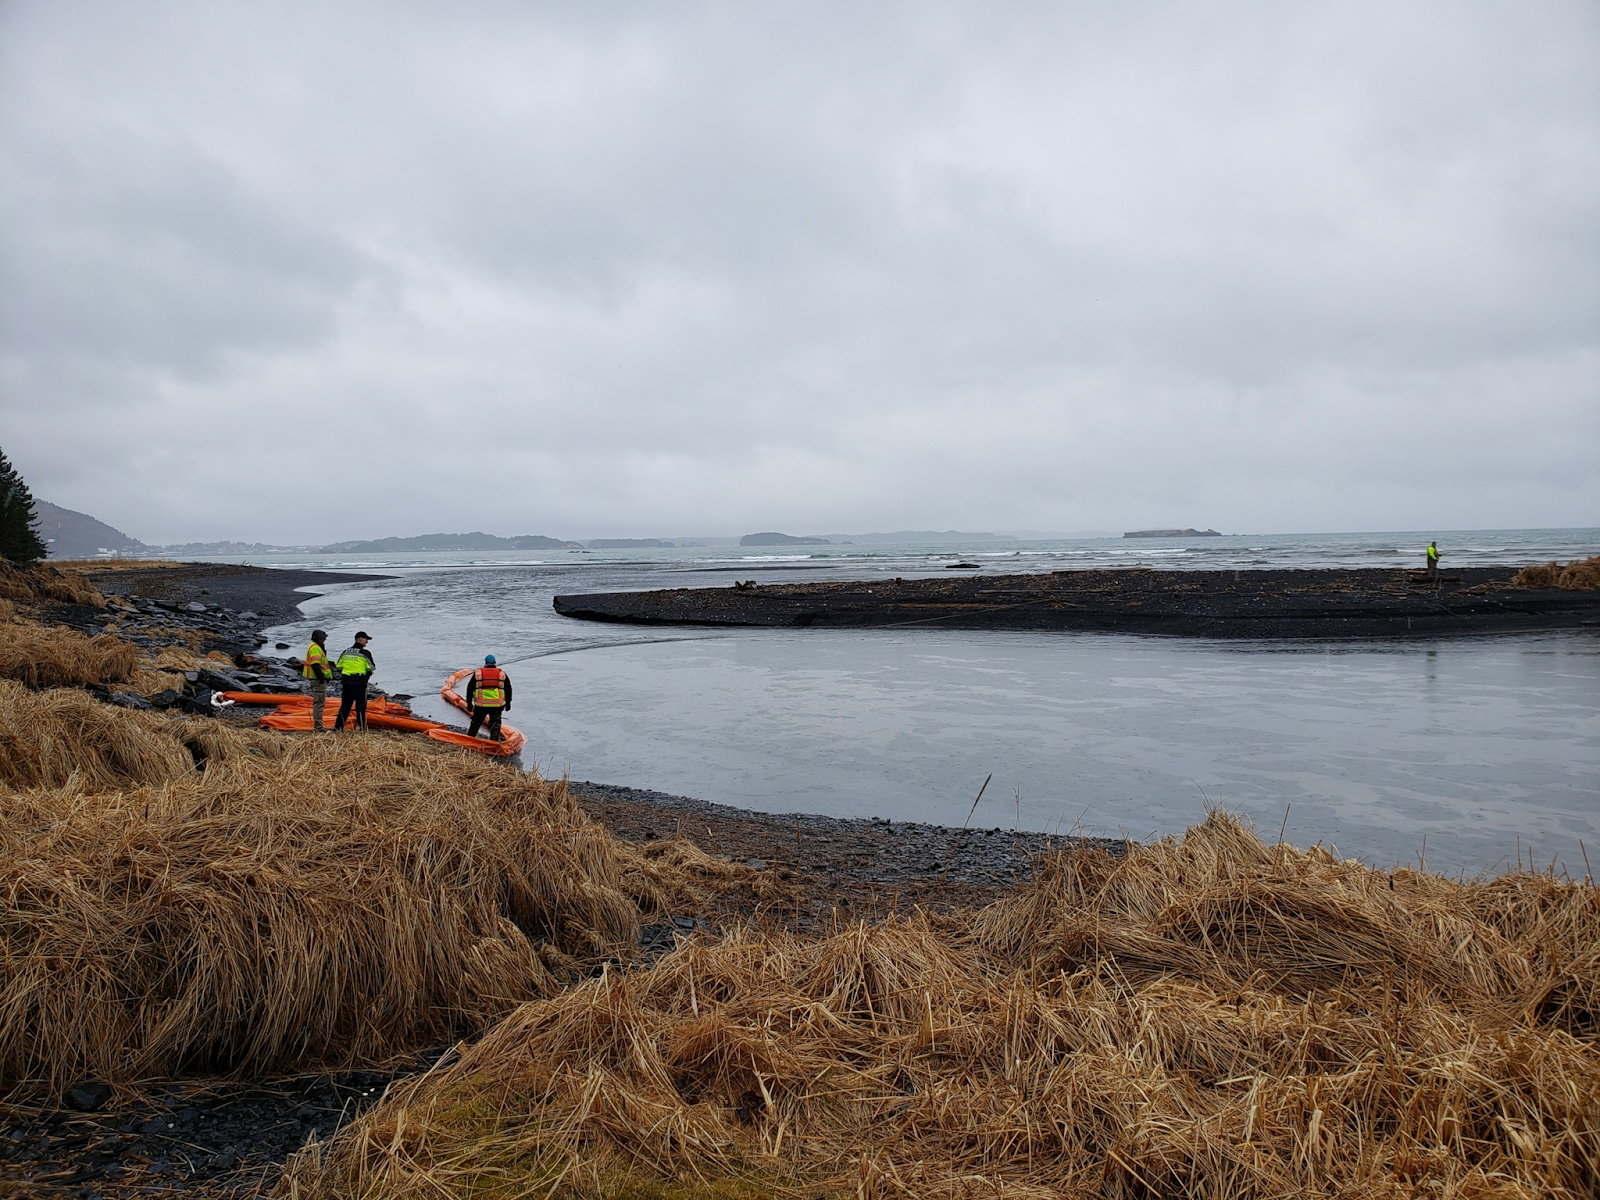 Three people stand on the edge of the water with oil spill boons deployed. 